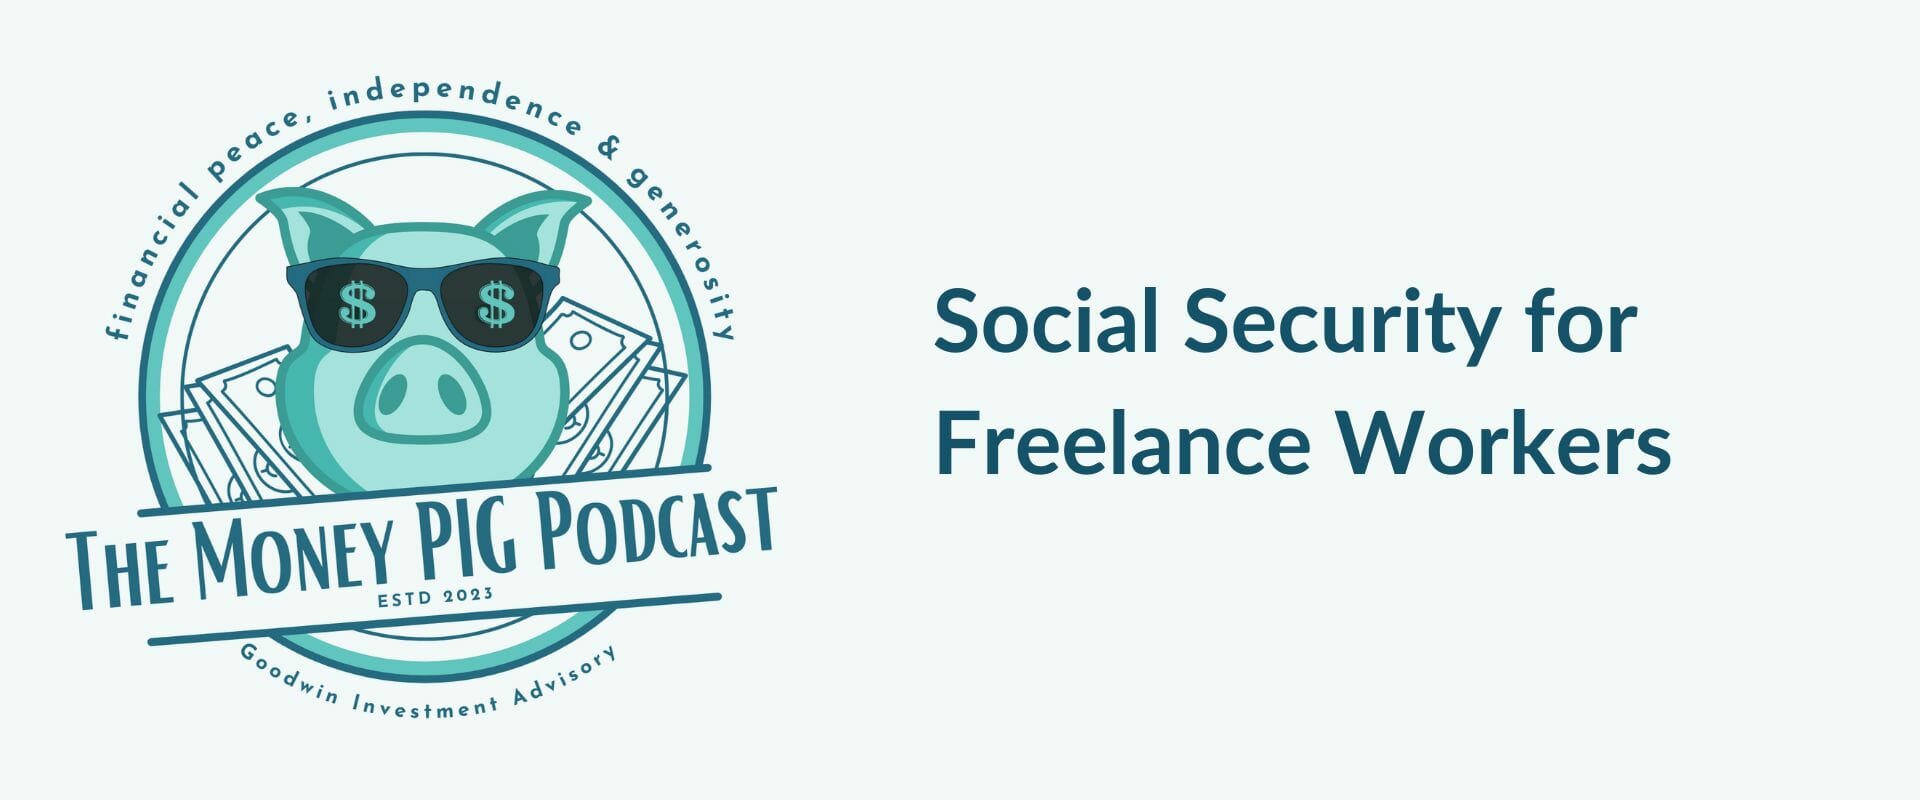 Social Security for Freelance Workers